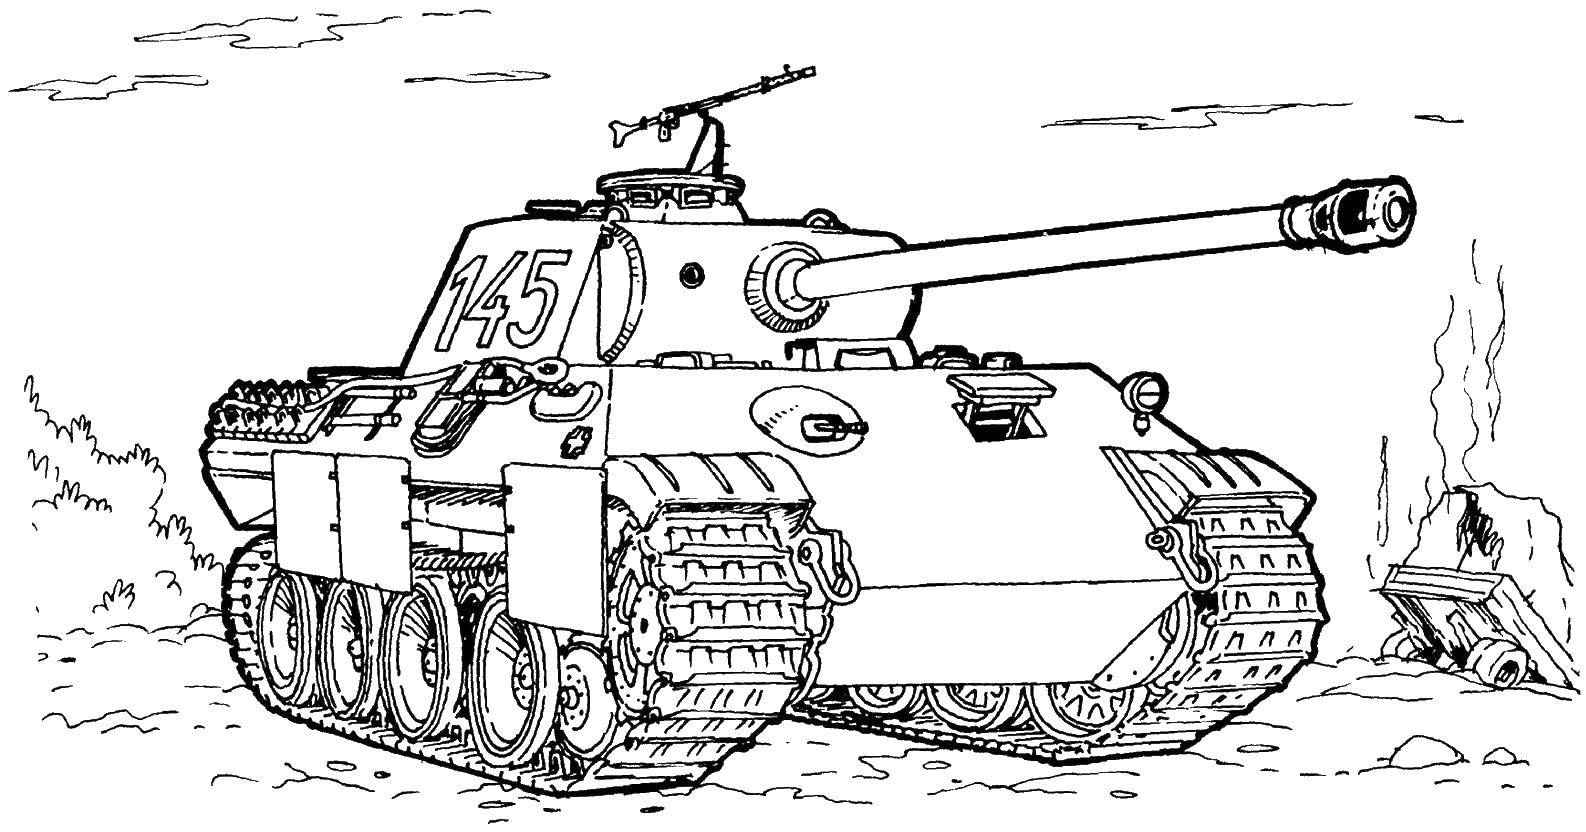 Coloring Tank type 74. Category military coloring pages. Tags:  tank.